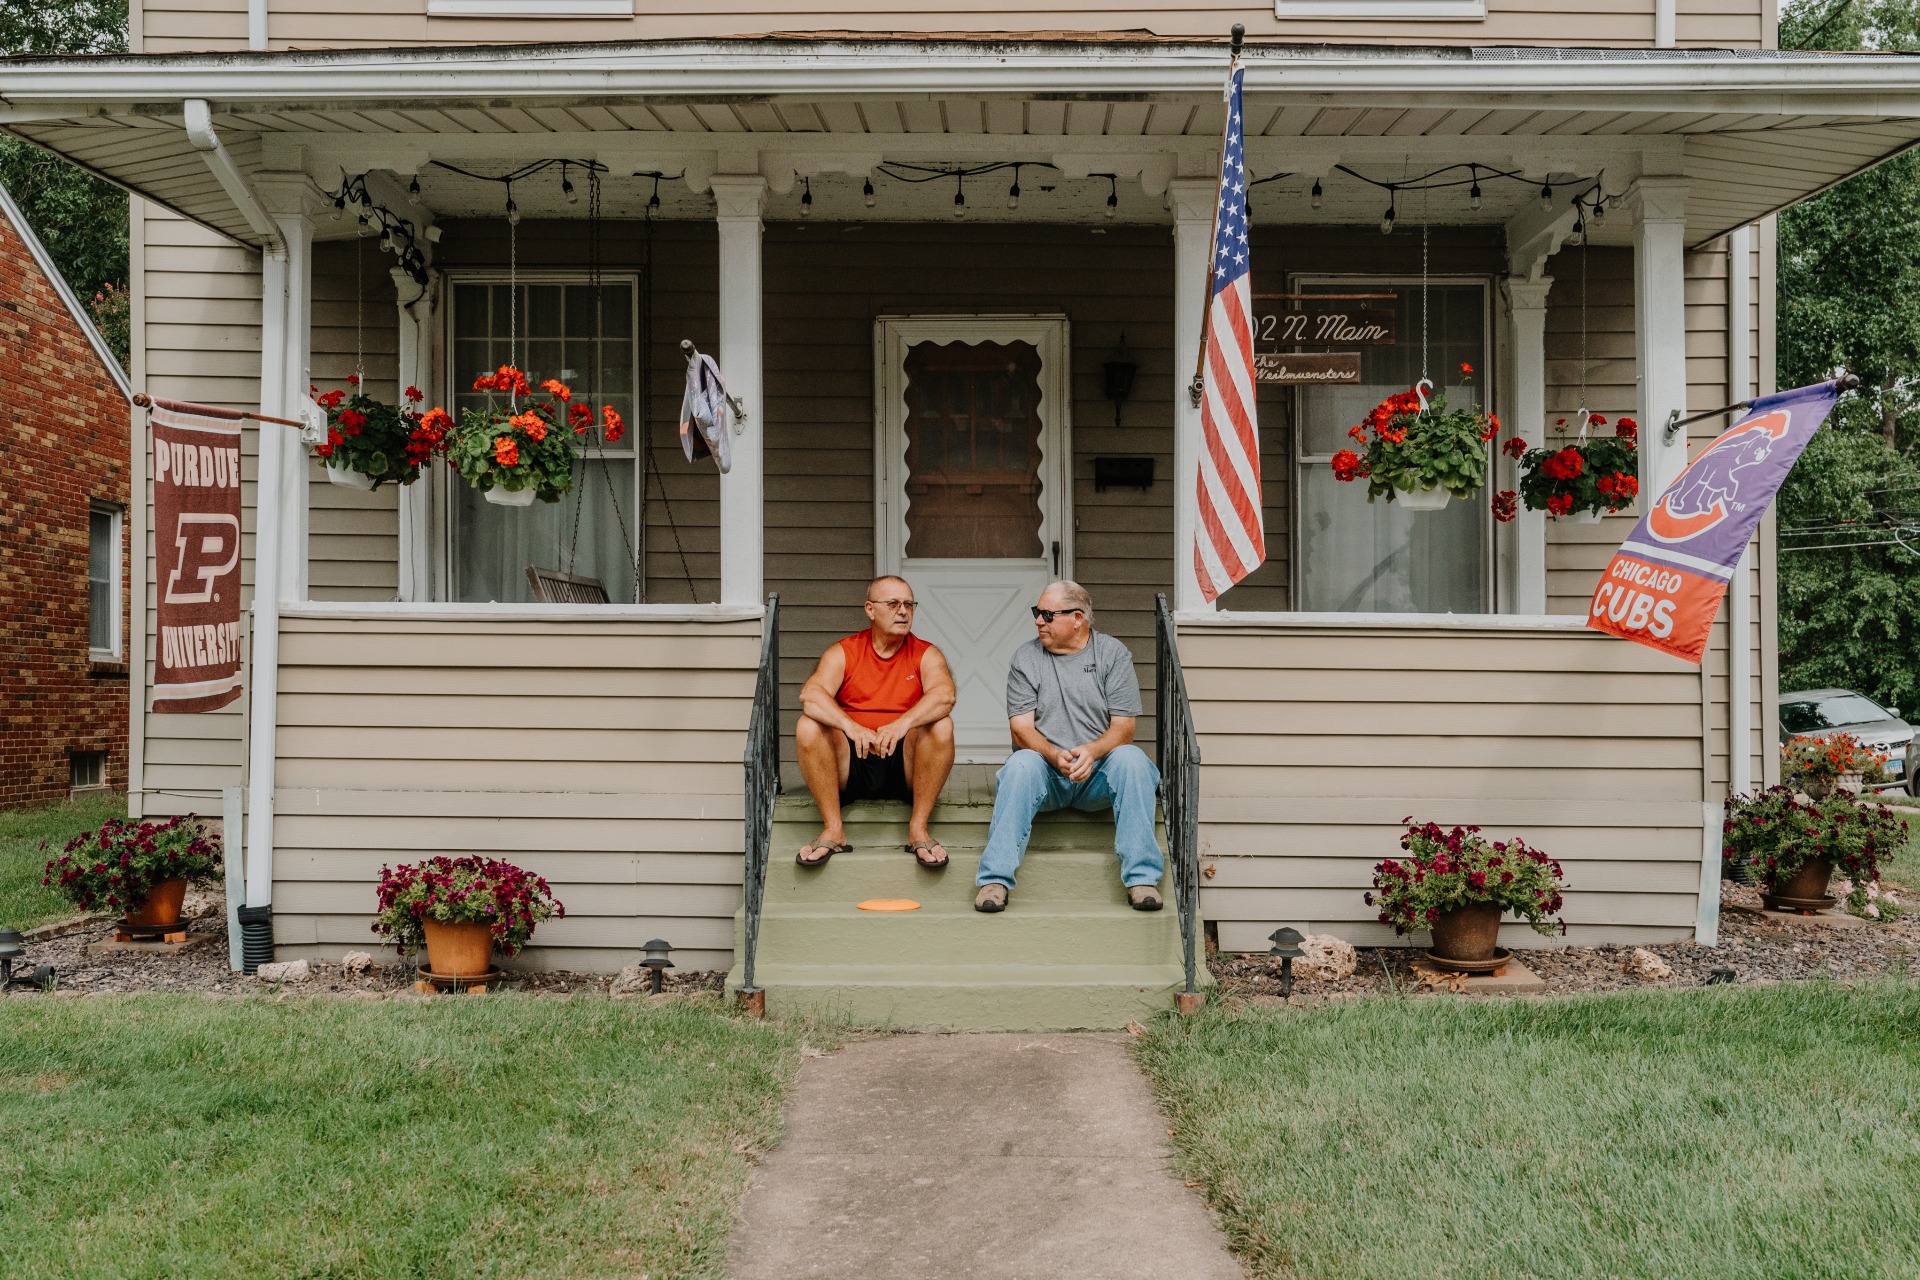 Two men sit on the front steps of a house